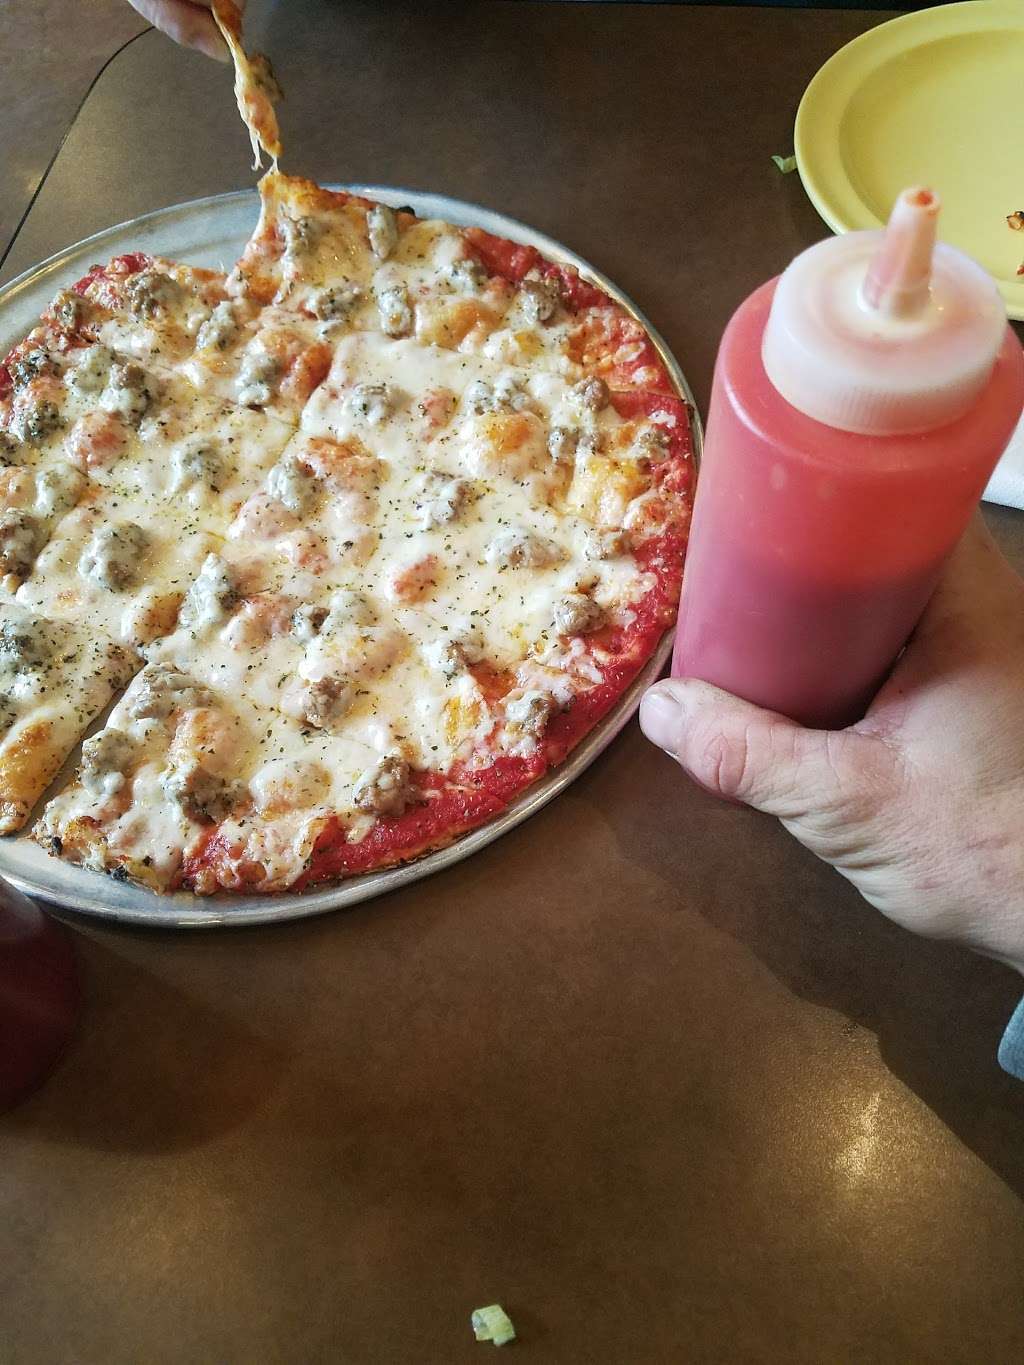 Monicals | 6010 W 86th St, Indianapolis, IN 46278 | Phone: (317) 870-7722